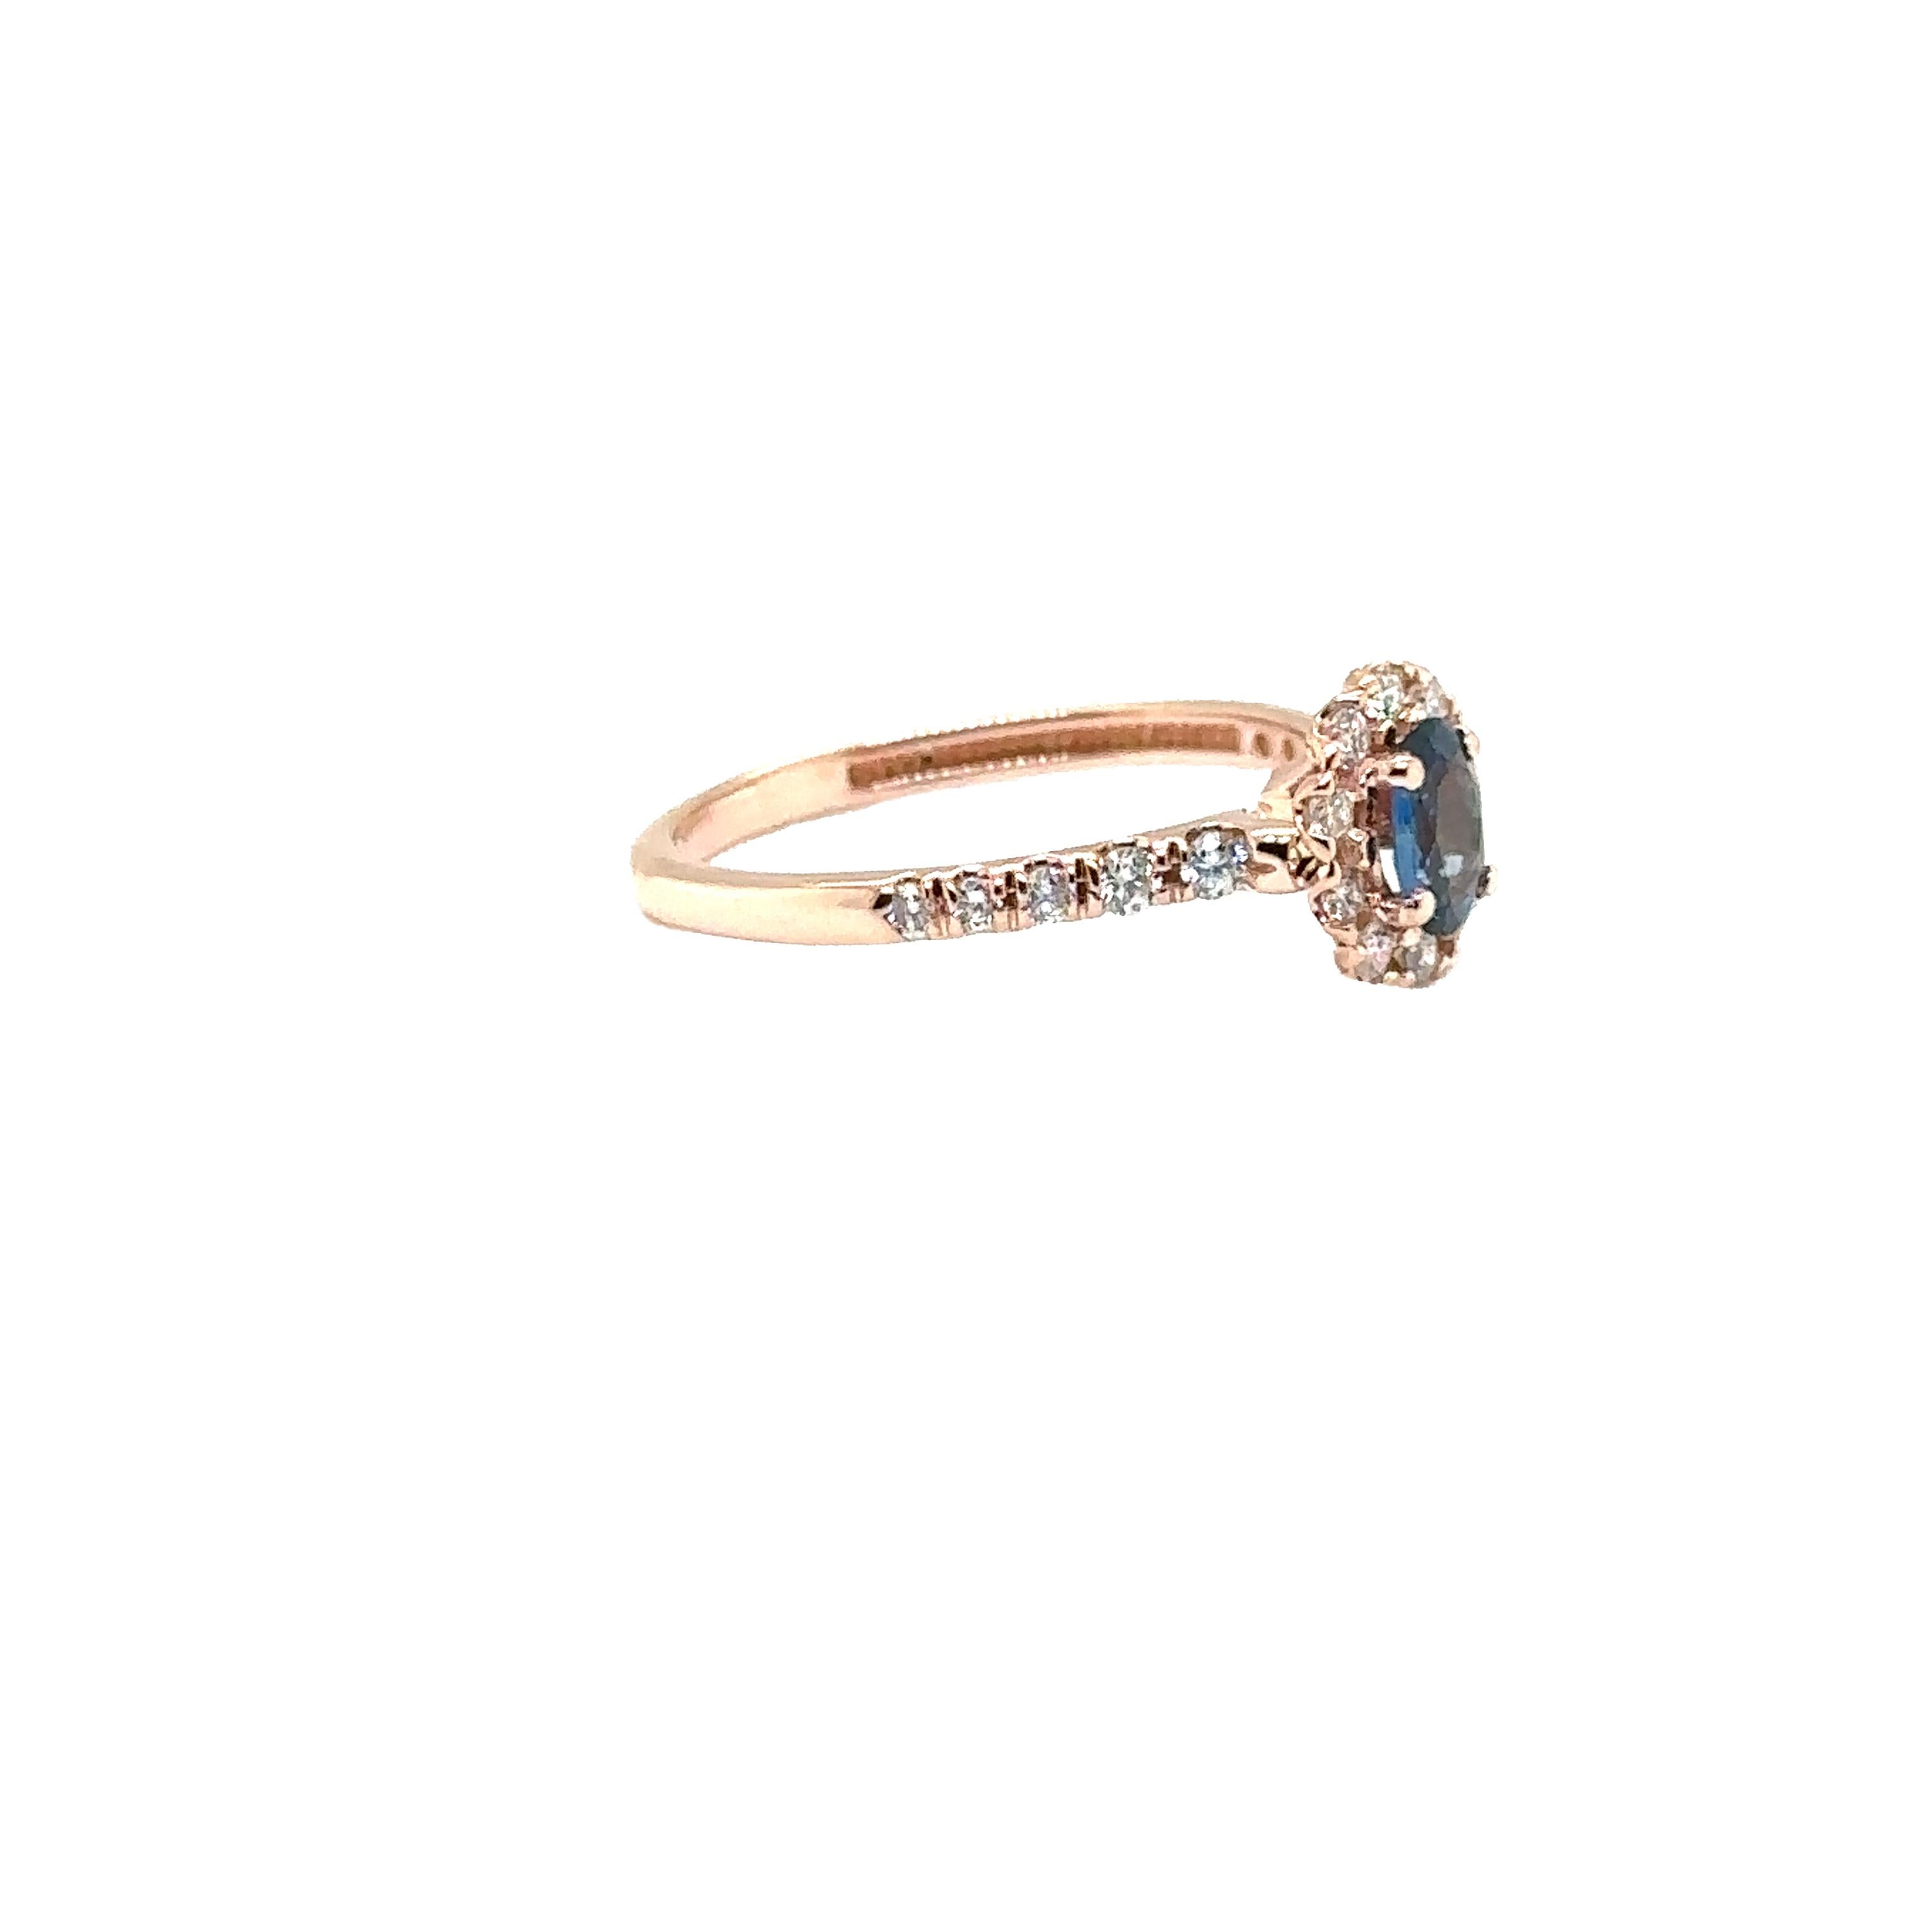 Women's JAS-21-2235 - 14K ROSE GOLD OVAL SAPPHIRE RING with DIAMONDS For Sale